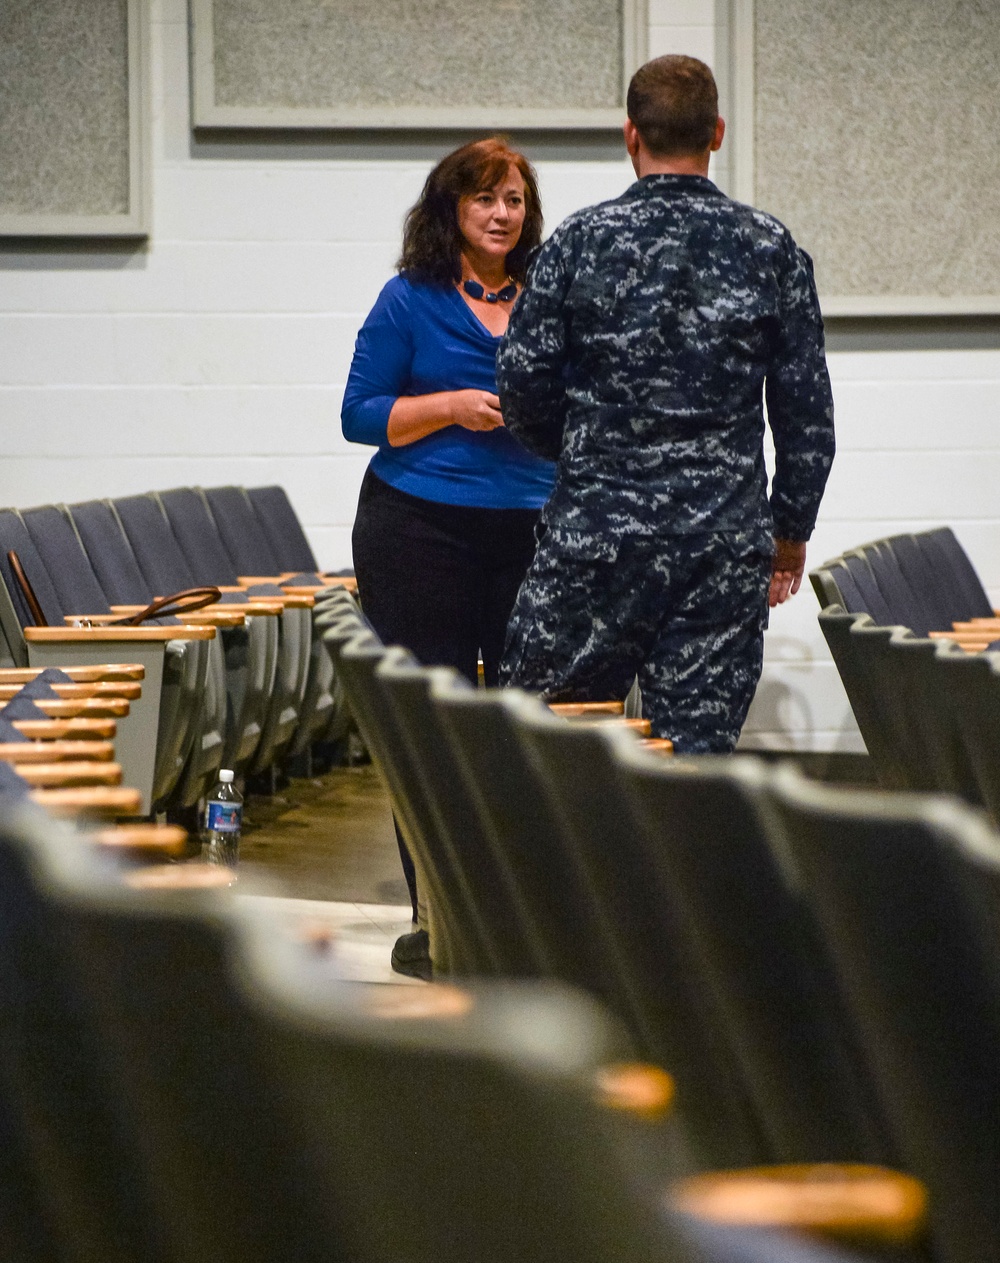 First class petty officer symposium